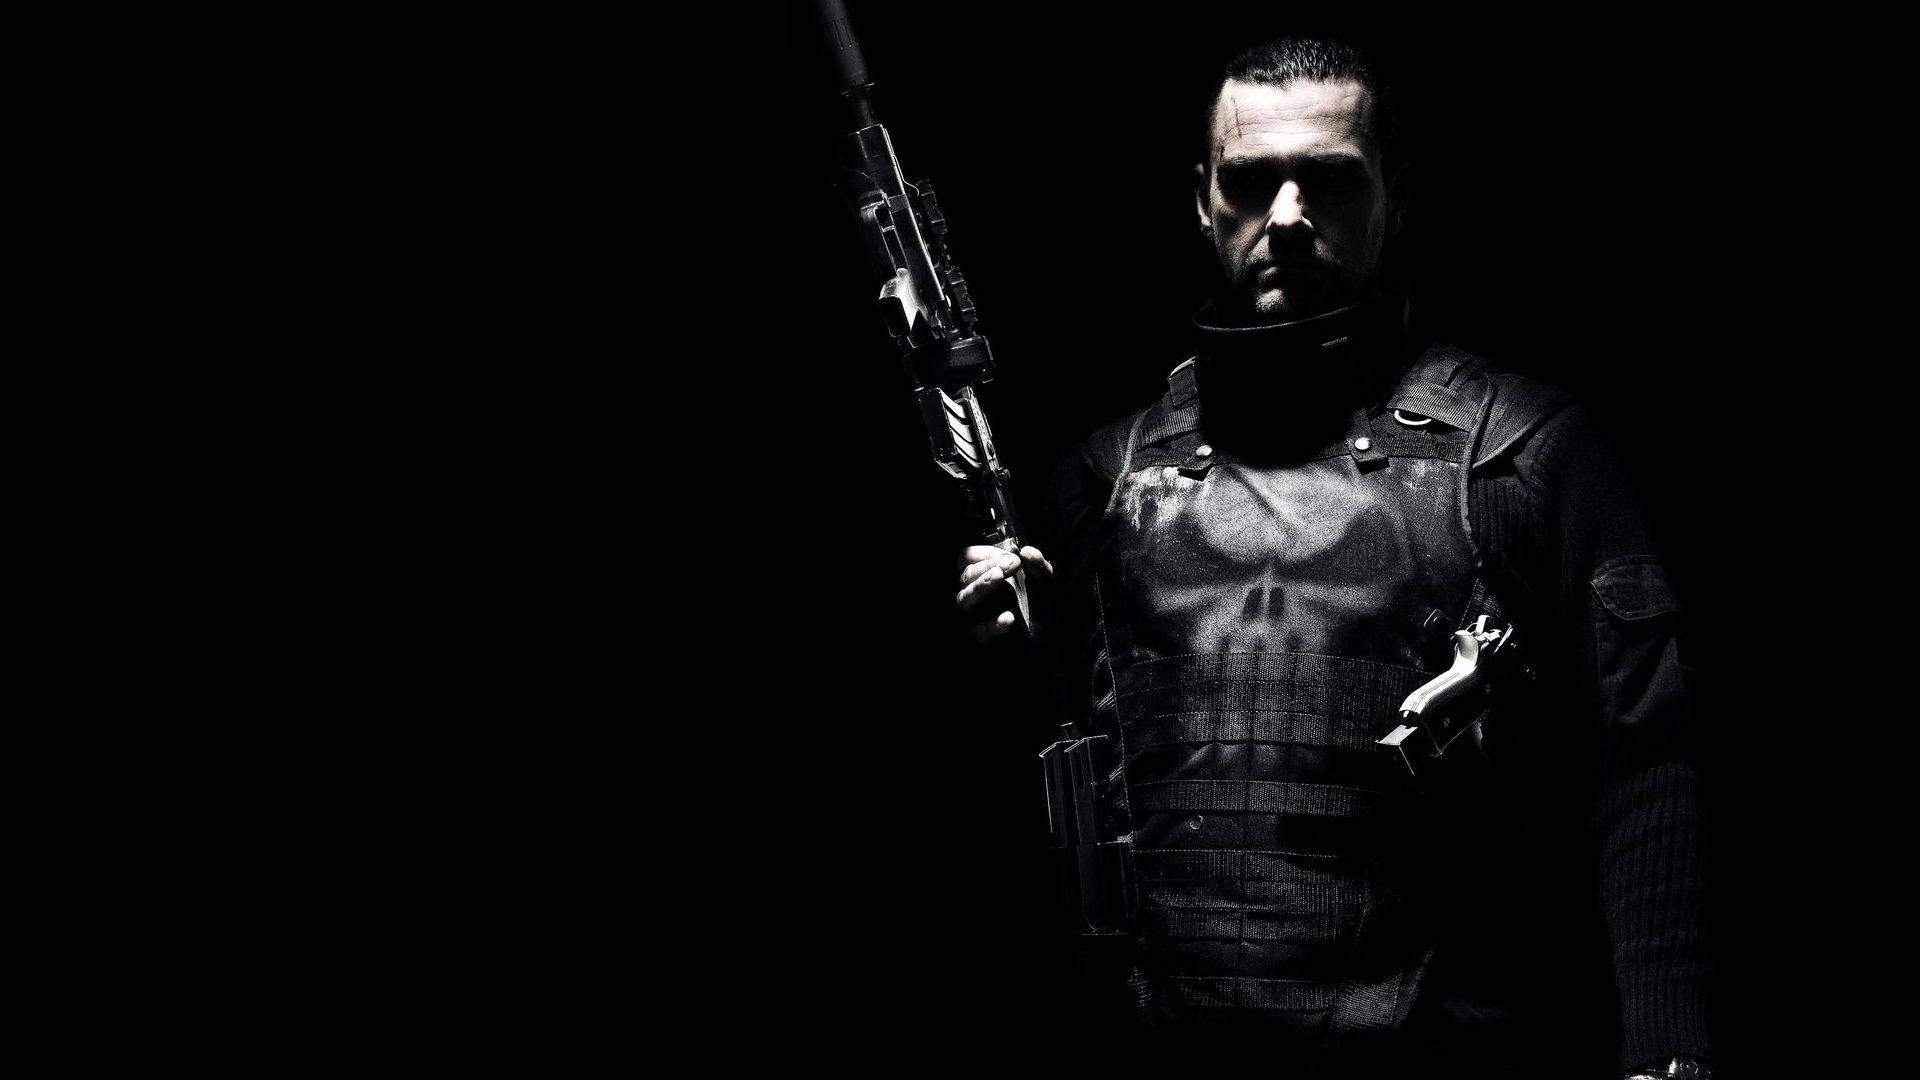 Prepare to feel the wrath of The Punisher Wallpaper